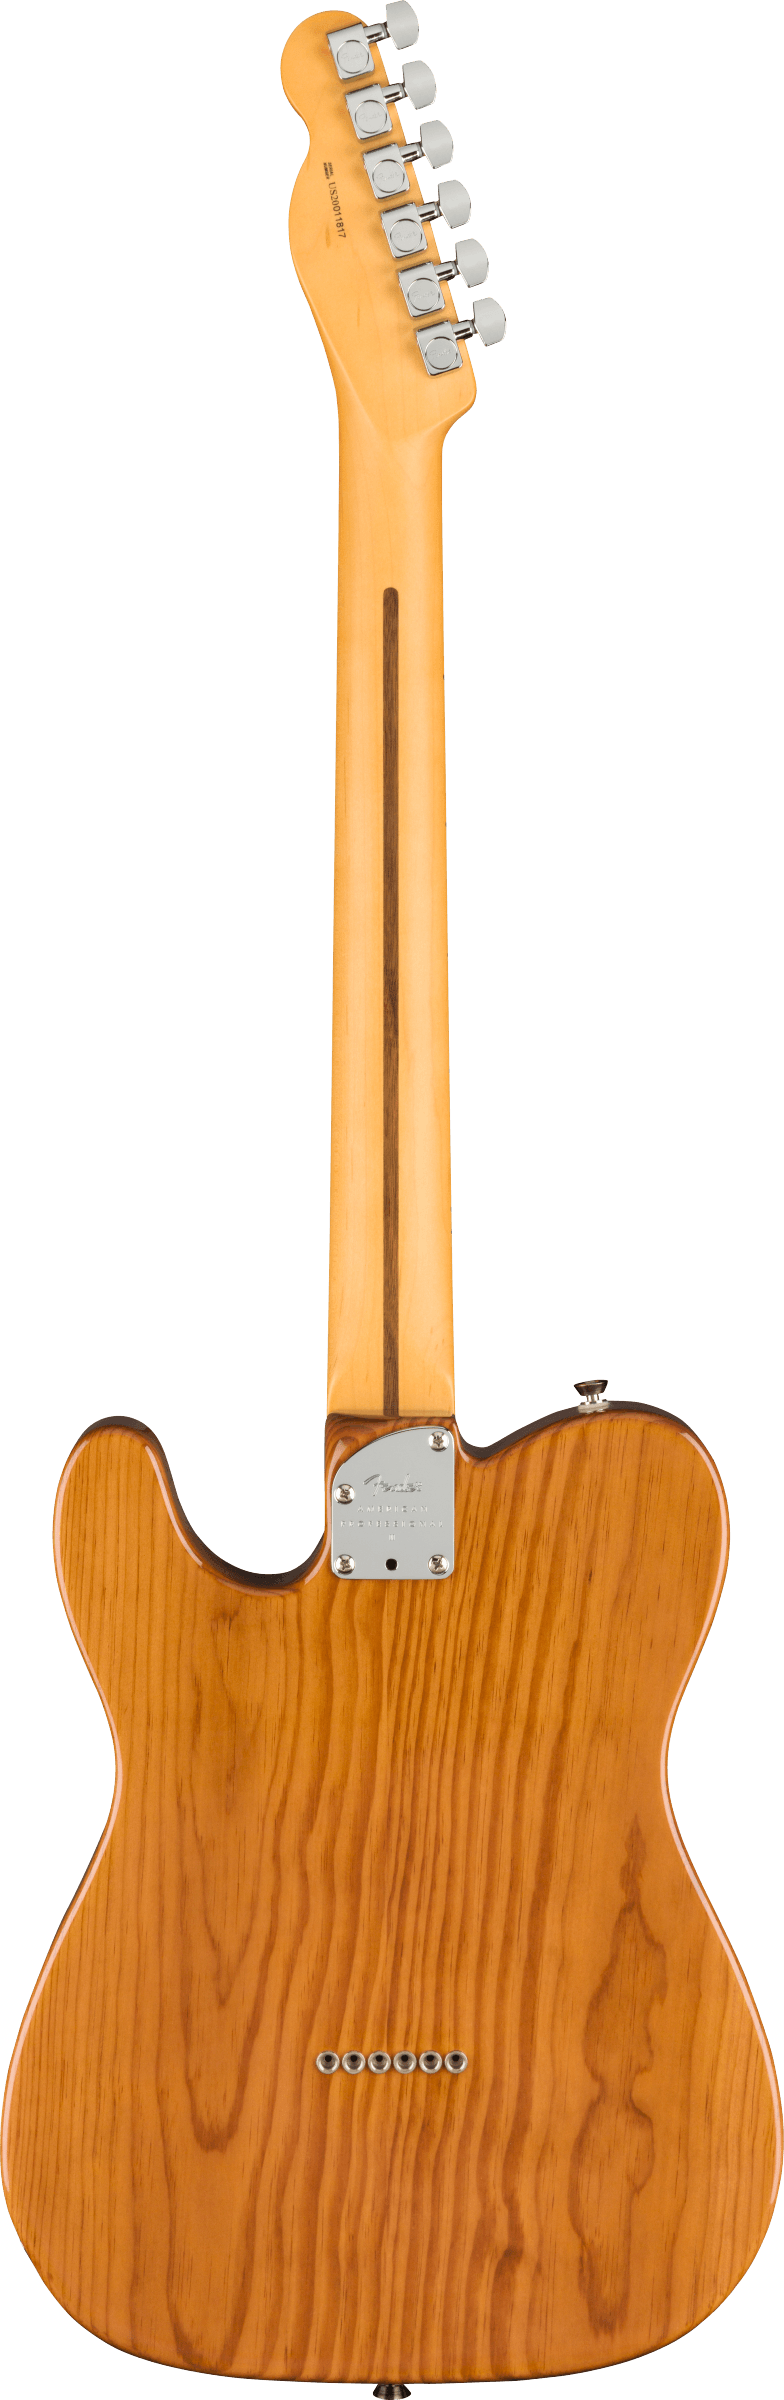 American Professional II Telecaster Maple Fingerboard, Roasted Pine